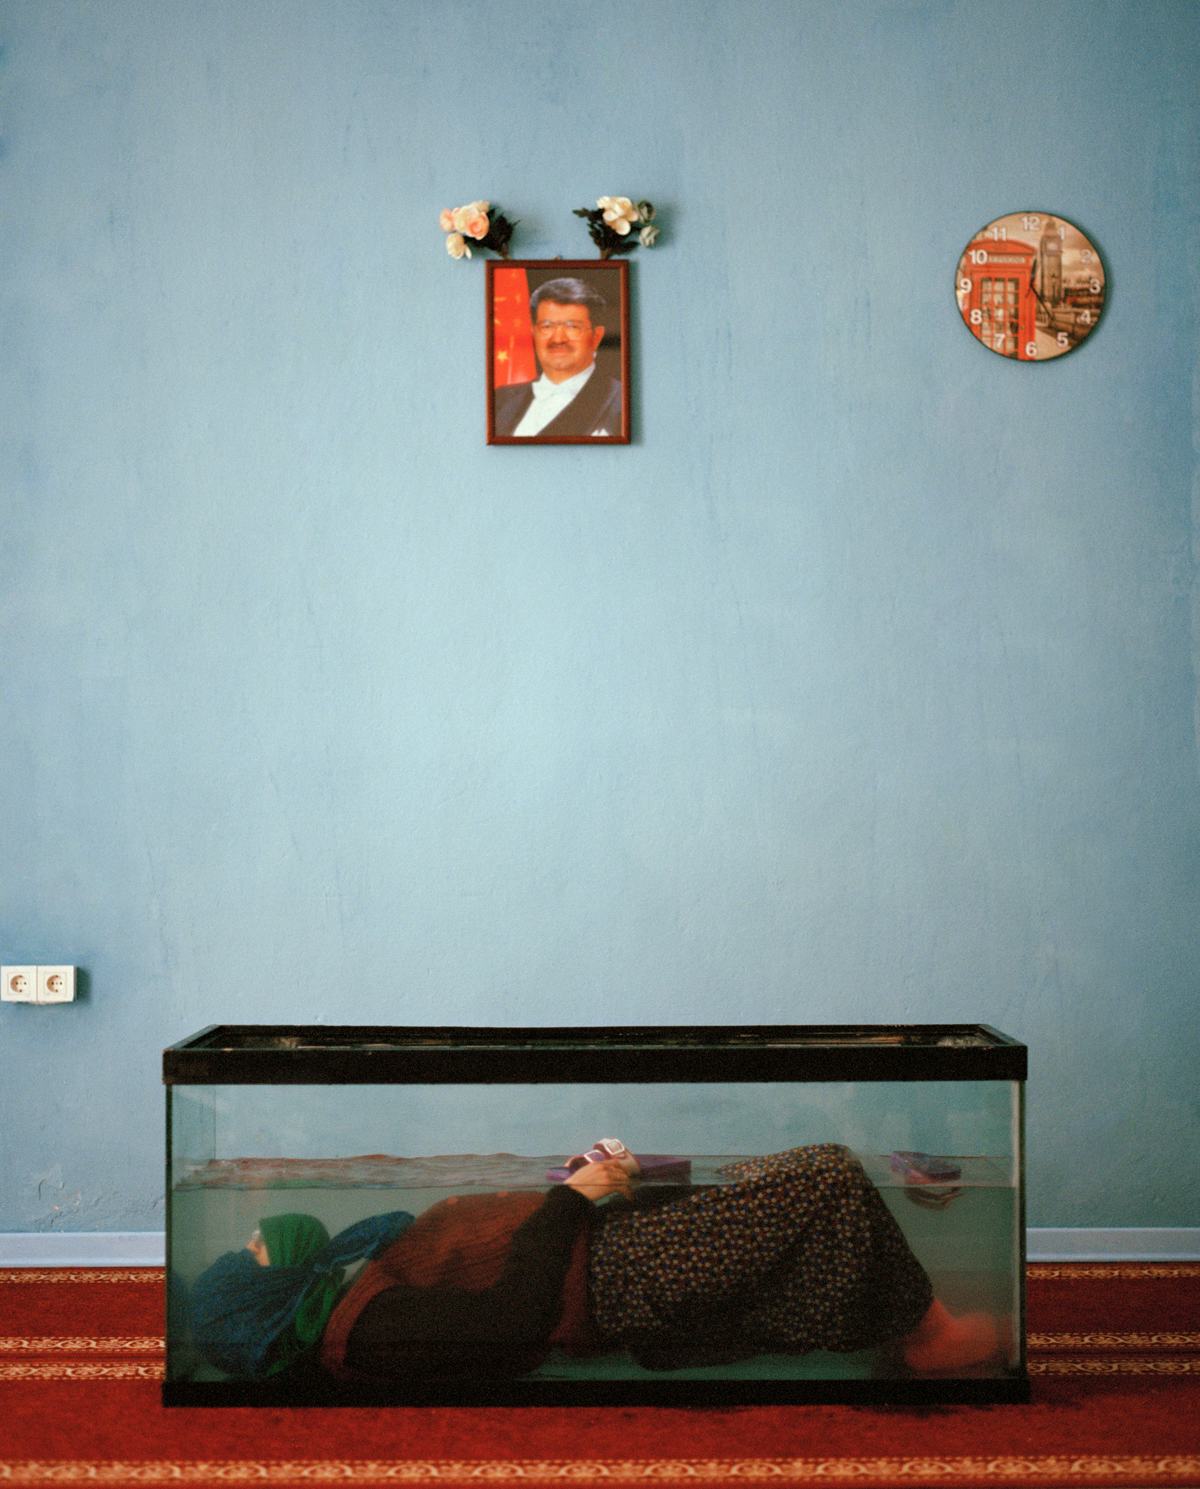 A women dressed in traditional Anatolian clothing lying in a fish tank, in a what appears to be a Turkish home (red carpet on the floor, blue walls.) On the wall hangs a portrait of Turgut Özal and a clock showing the Big Ben in London.